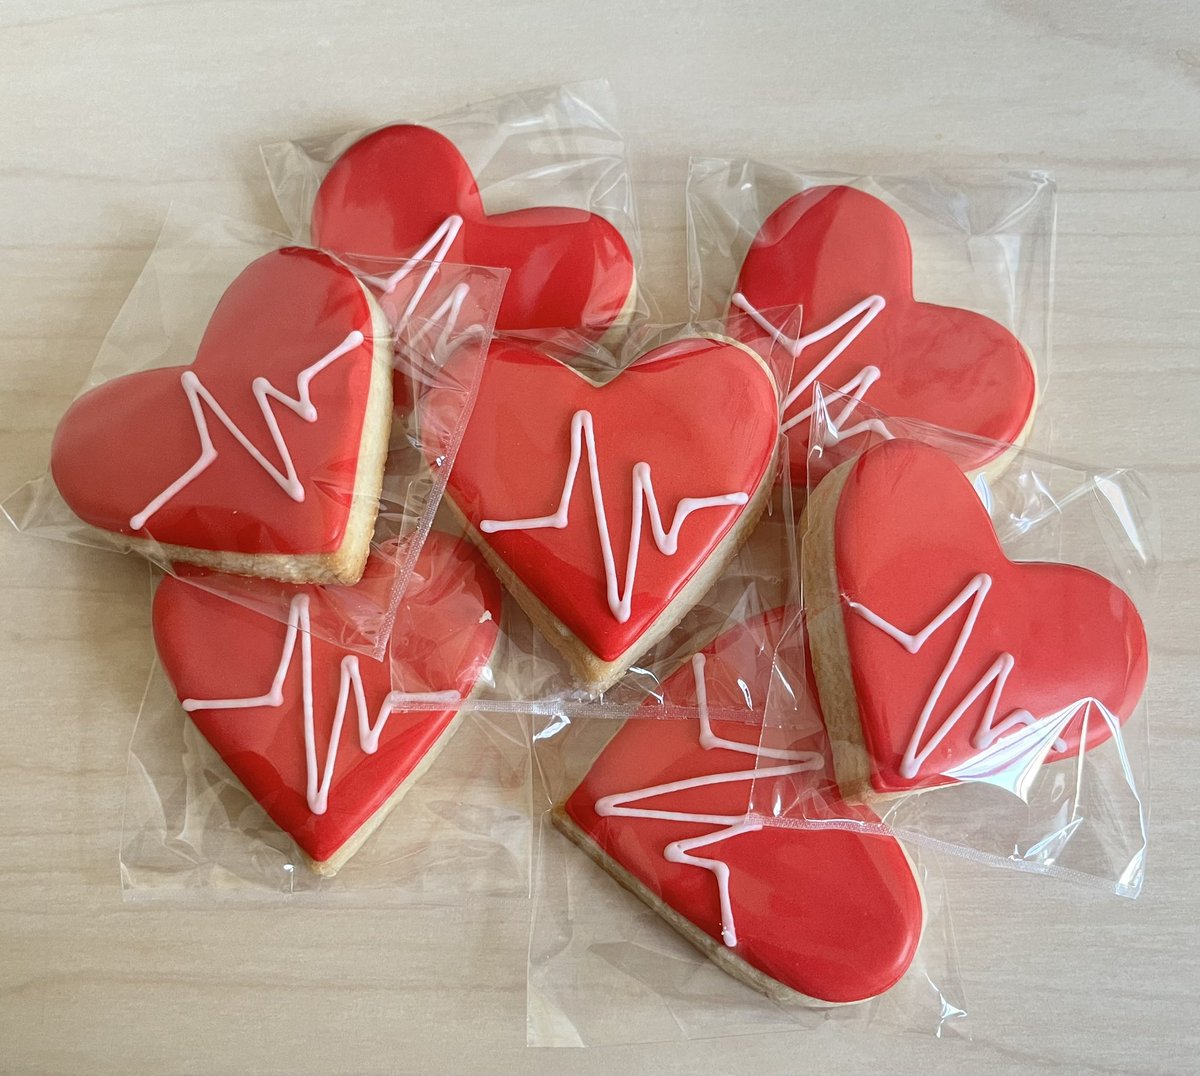 Happy Valentine’s Day ❤️🫀 always look forward to @DrSanatani handing these out every year!! @BCCHresearch @bcchepresearch